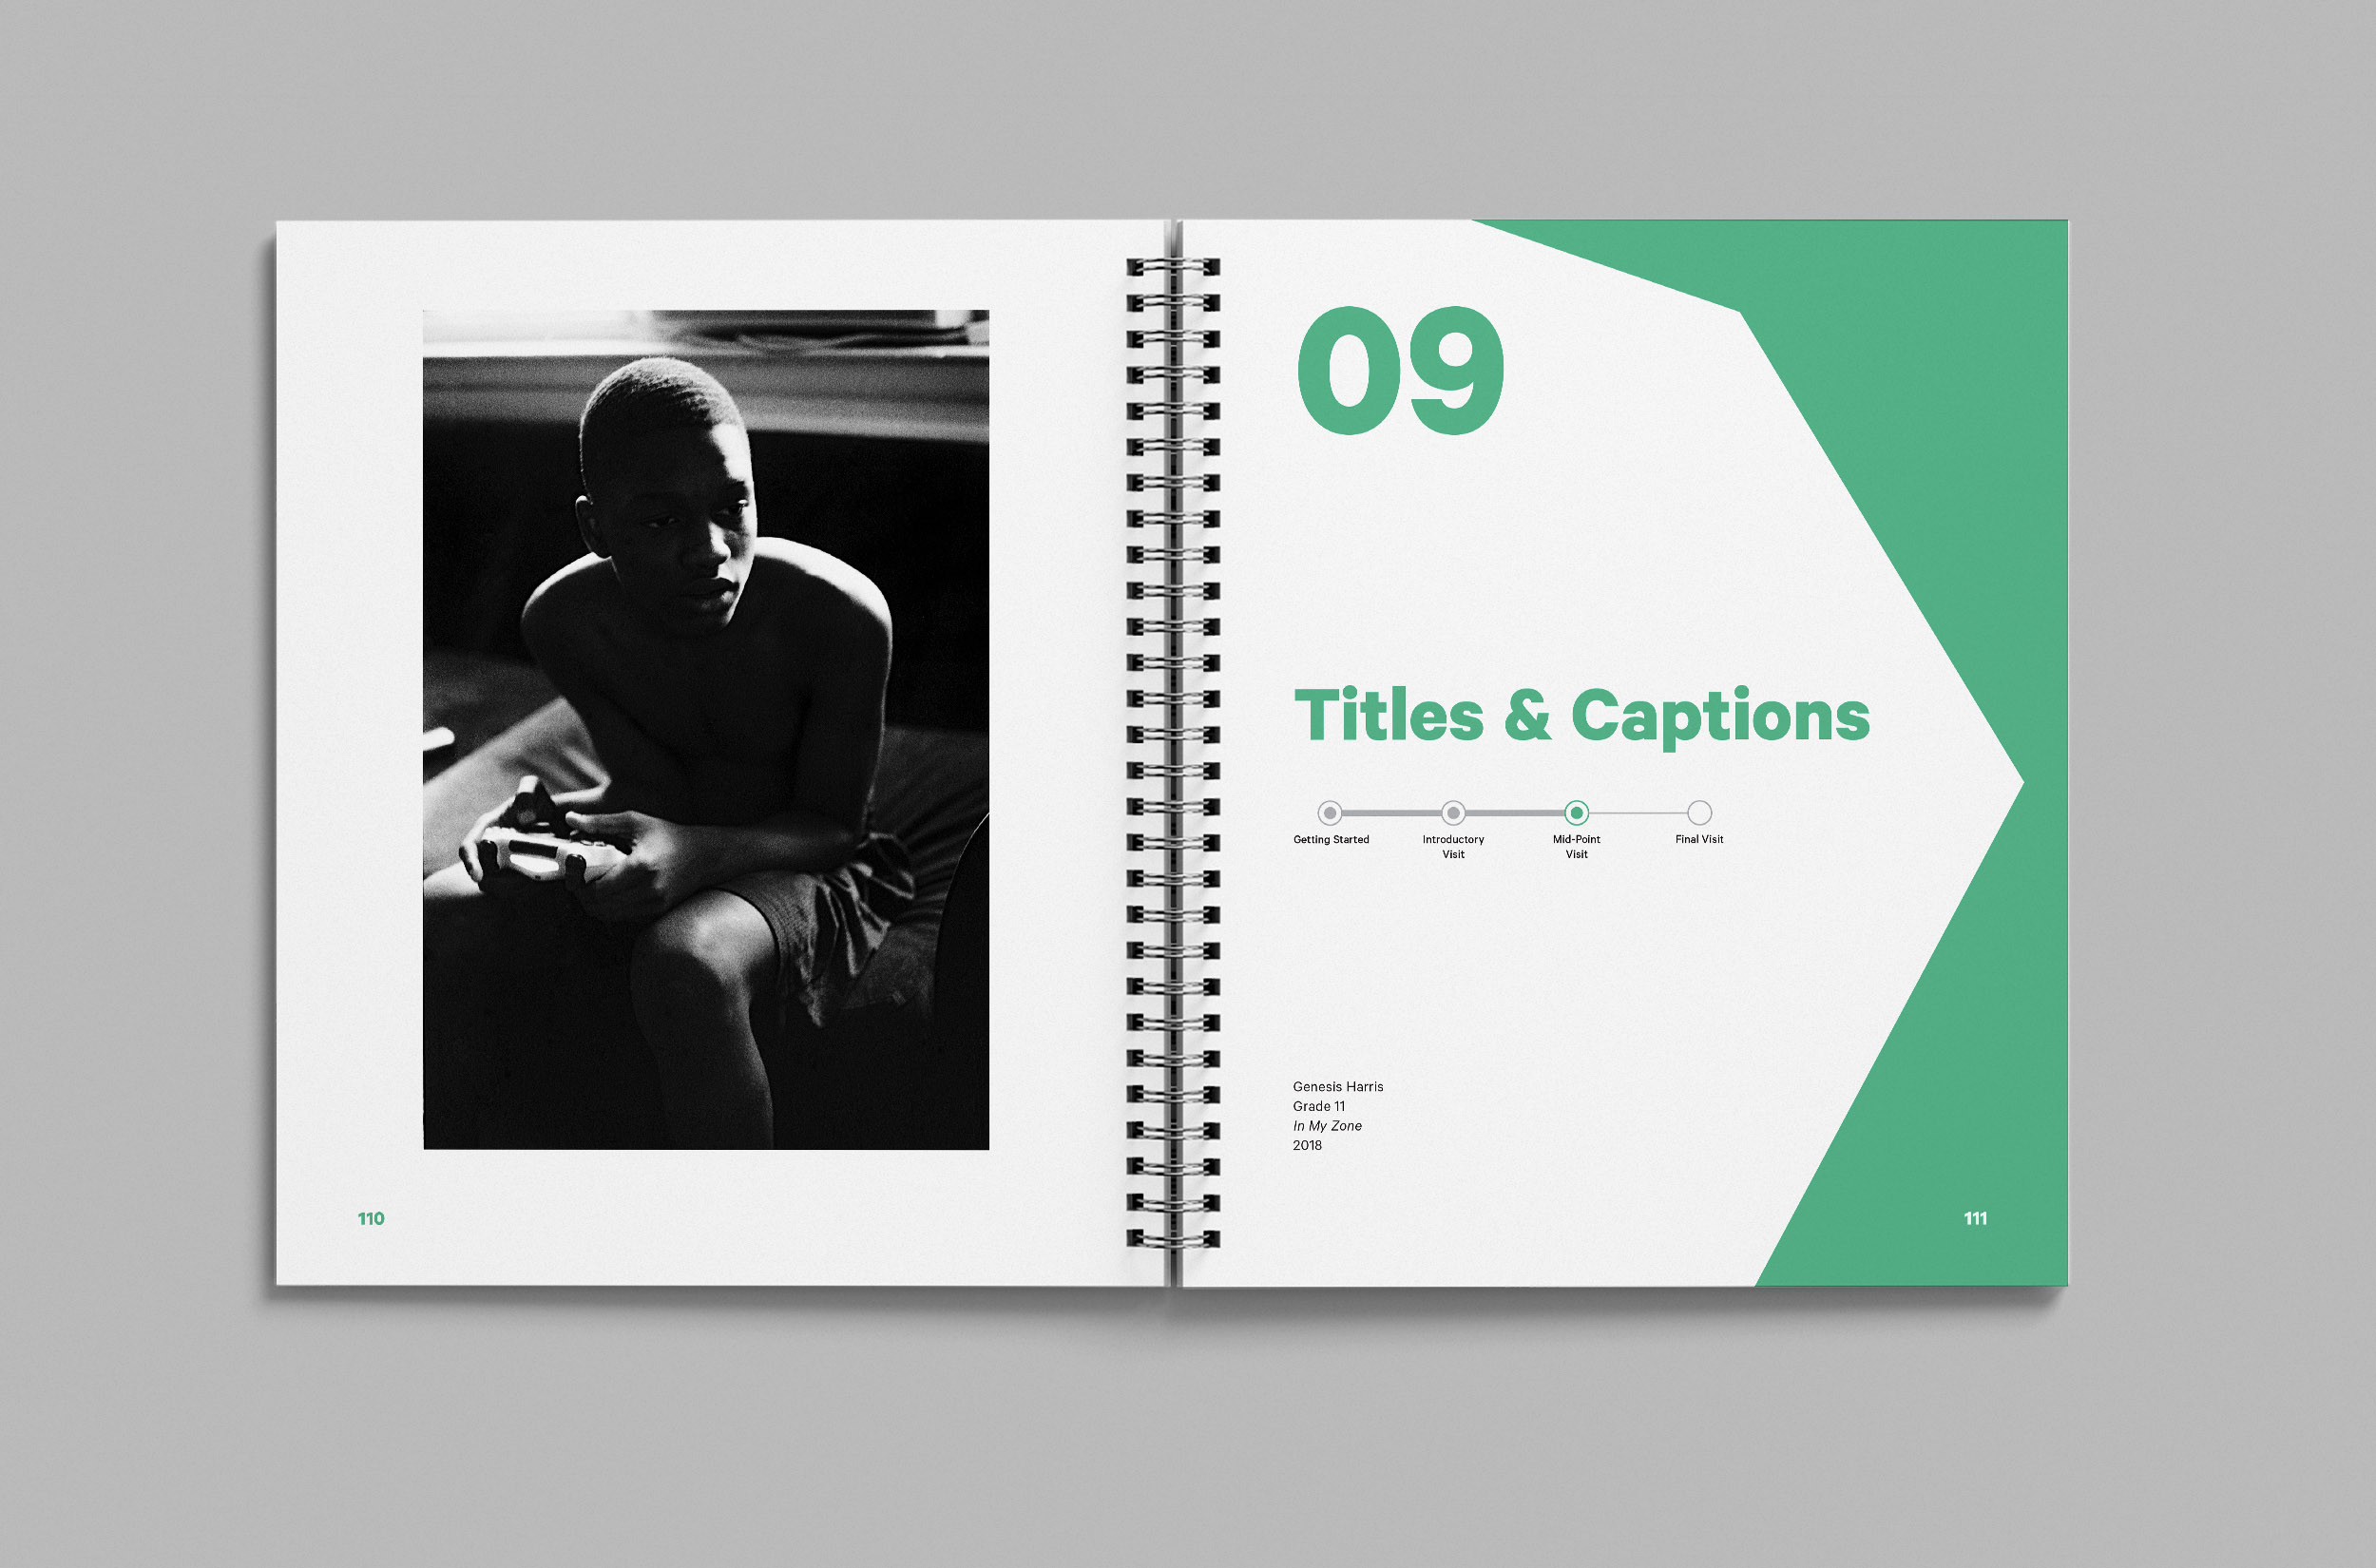 Image depicts an open workbook displaying pages that introduce a section on titles and captions for photography.